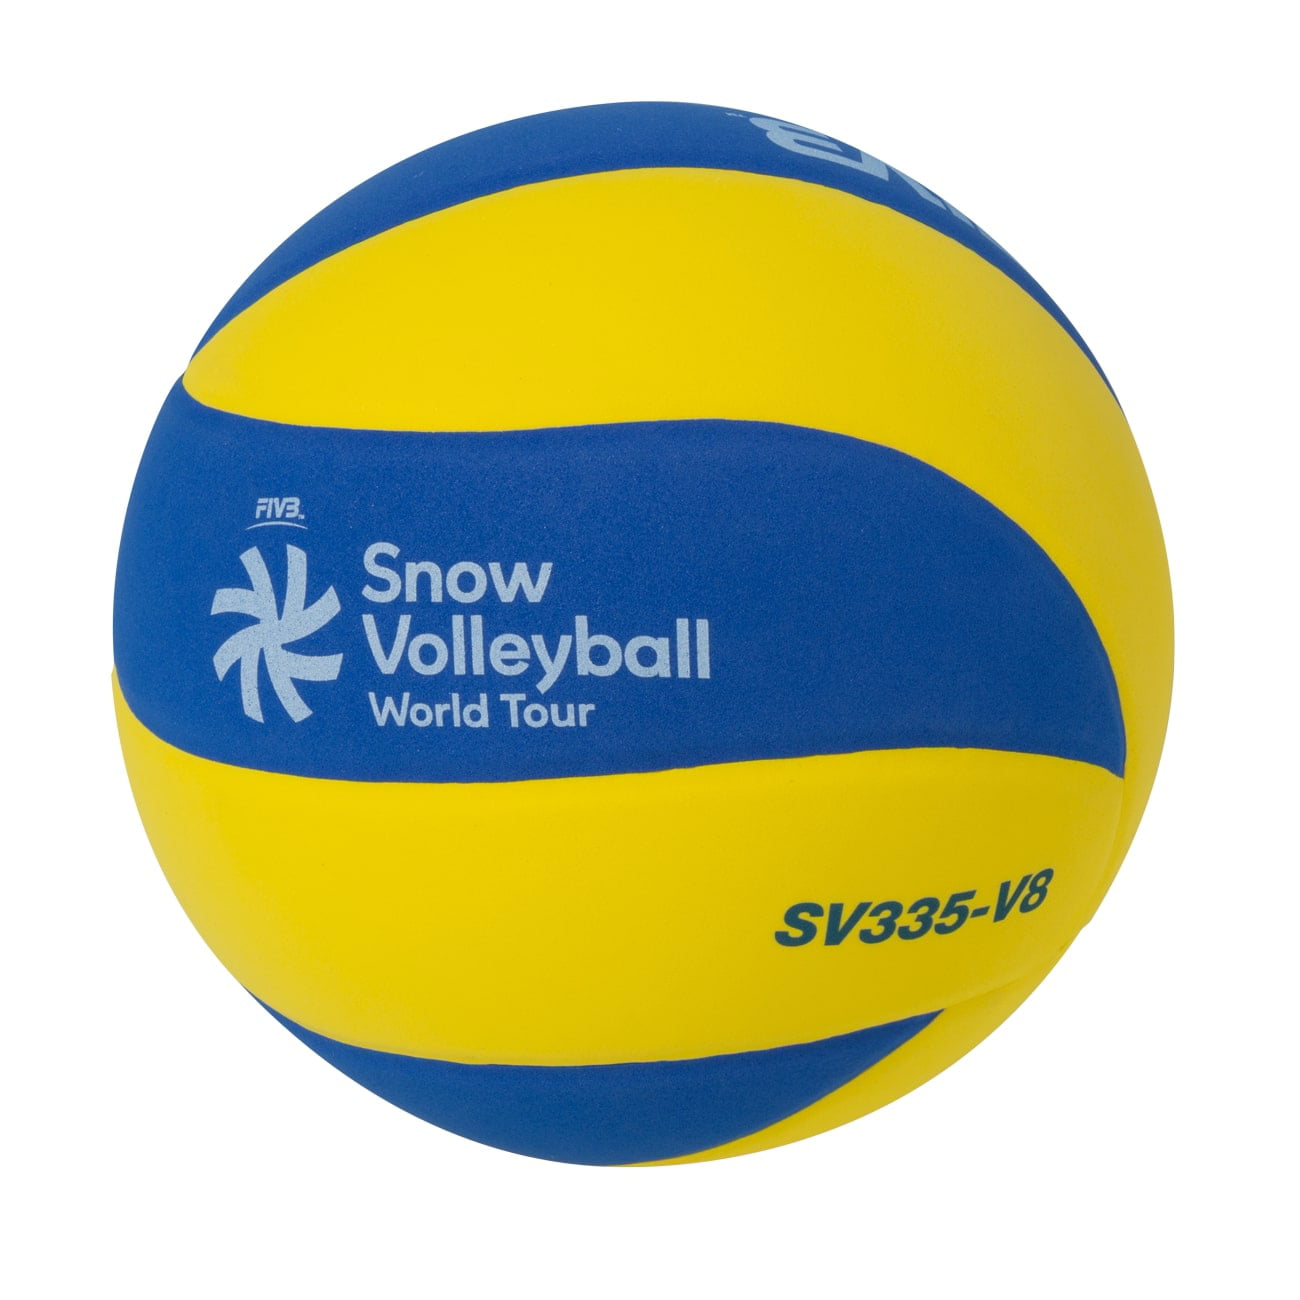 MIKASA SV335-V8 Snow Volleyball World Tour FIVB Approved Official game ball 